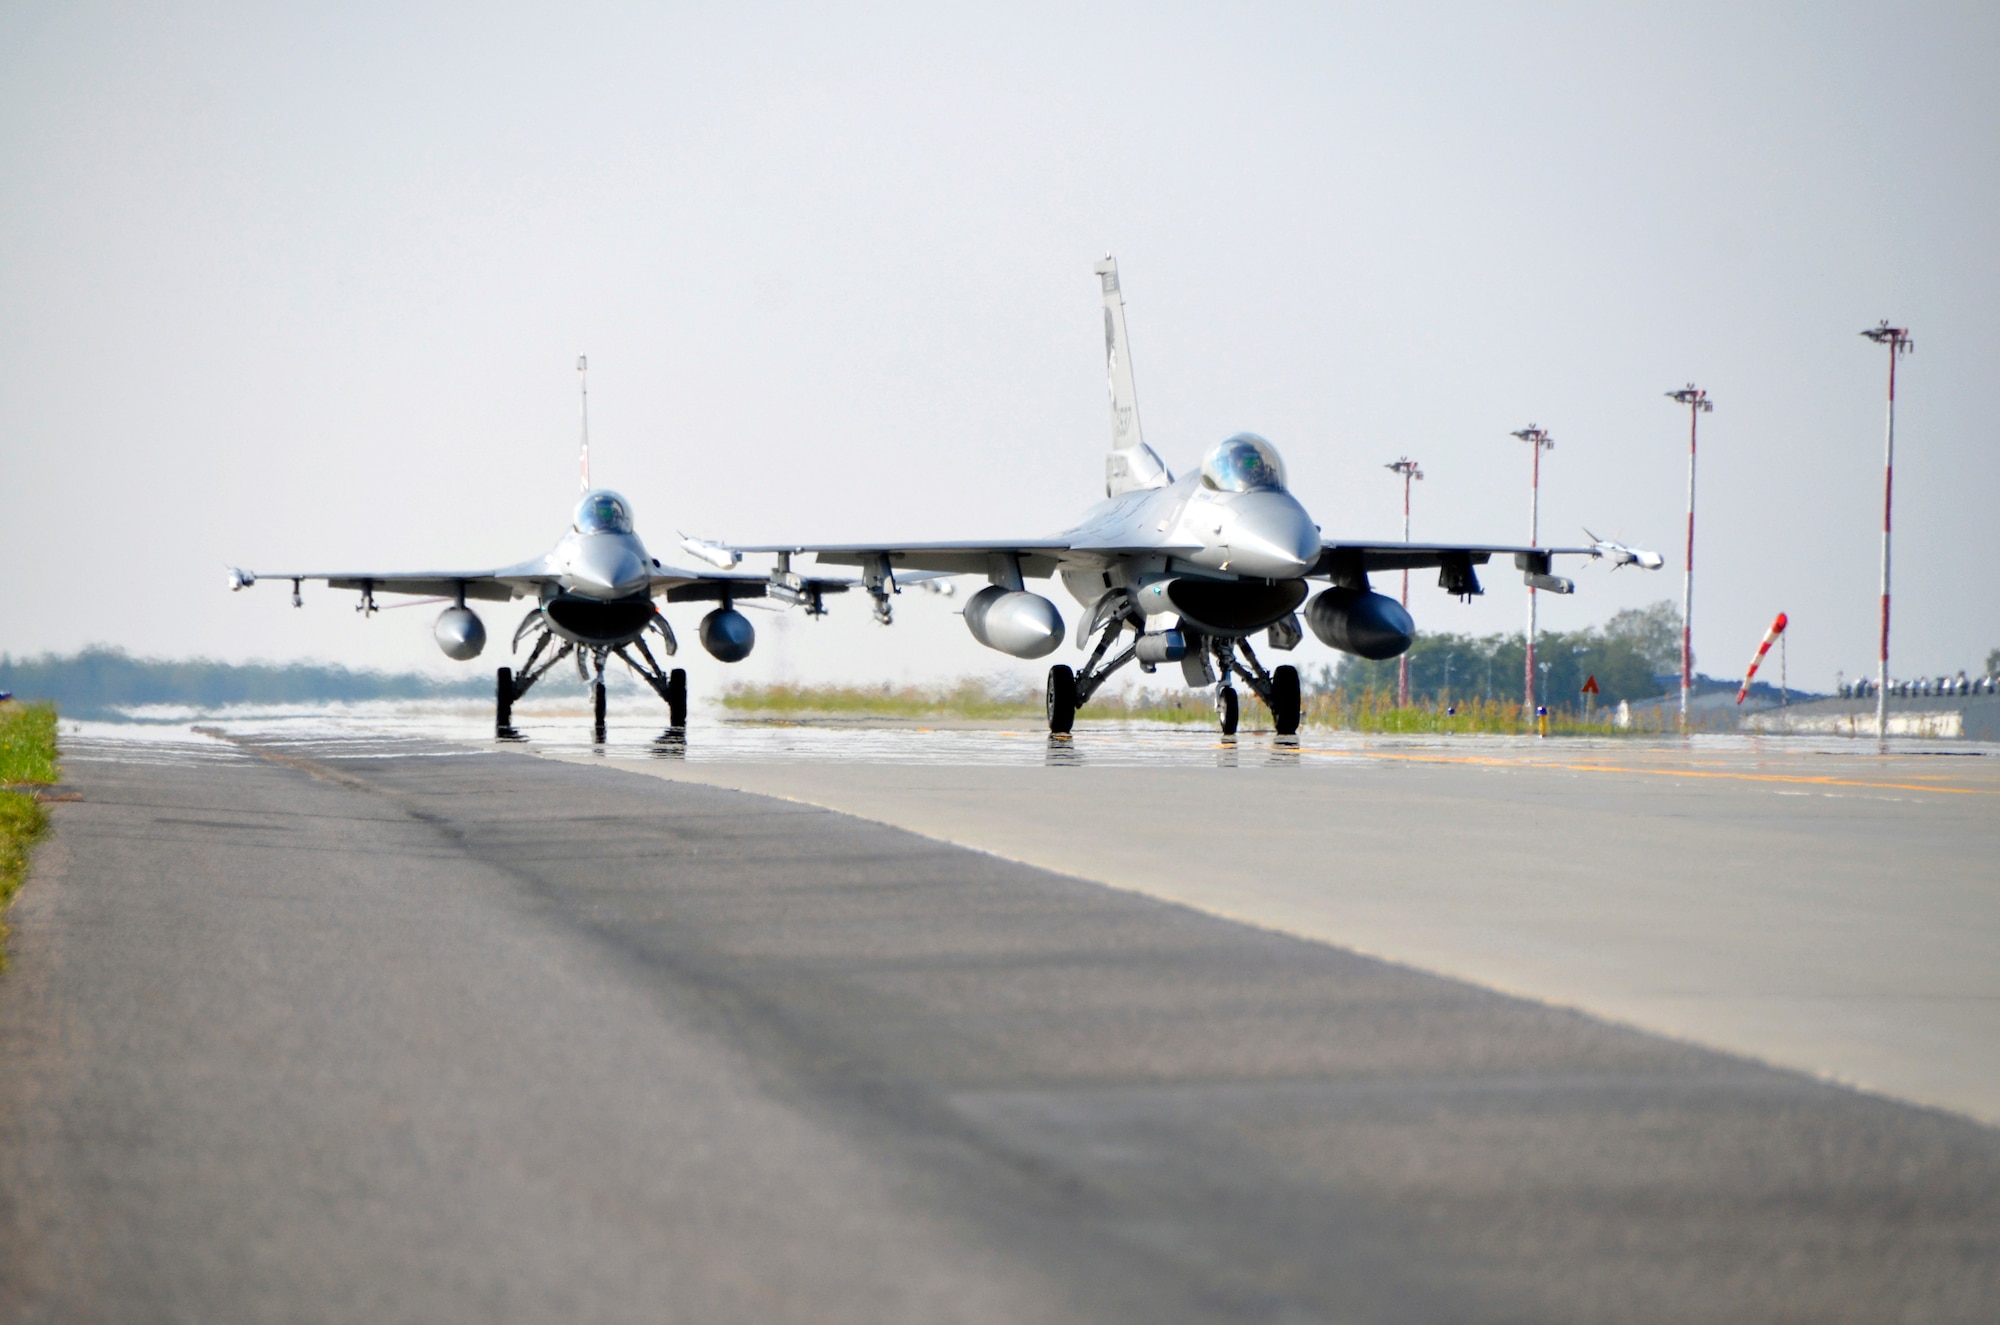 Two F-16 Fighting Falcons from the South Dakota Air National Guard arrive at Lask Air Base, Poland, Sept. 19, 2016, after completing a training mission. The 114th Fighter Wing deployed more than 100 personnel in support of Aviation Detachment 16-4, a bilateral training exercise between the U.S. and Polish forces. The 114 FW was able to train alongside Polish allies in a variety of missions to include, close air support, air to air and air to ground. (U.S. Air National Guard photo by Capt. Amy Rittberger)